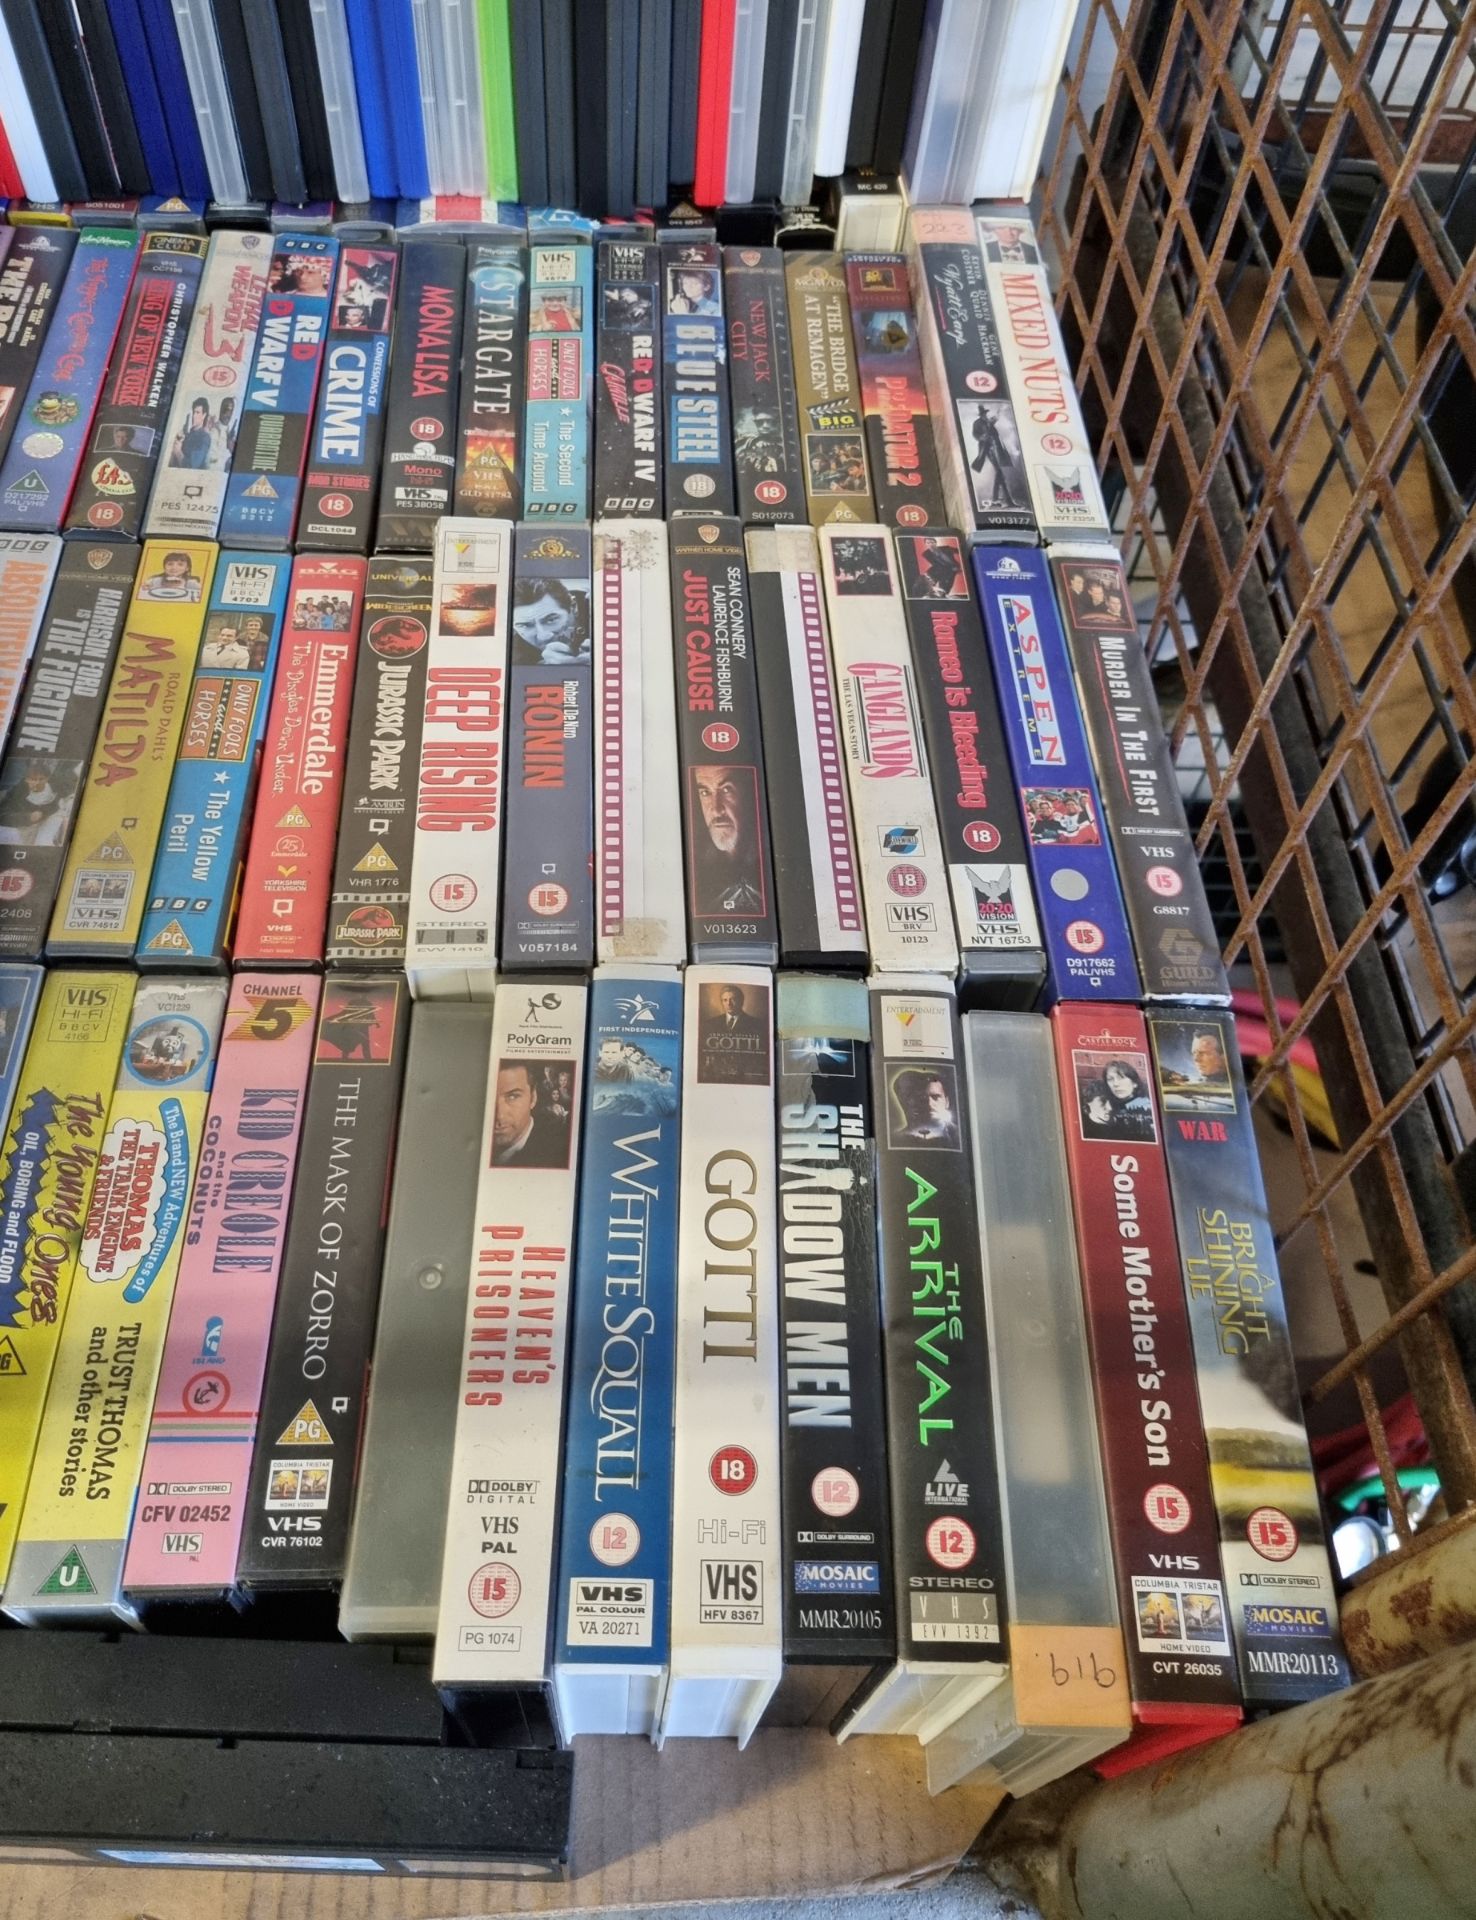 Various DVDs and VHS tapes - film and TV series - mixed genres - Image 2 of 7